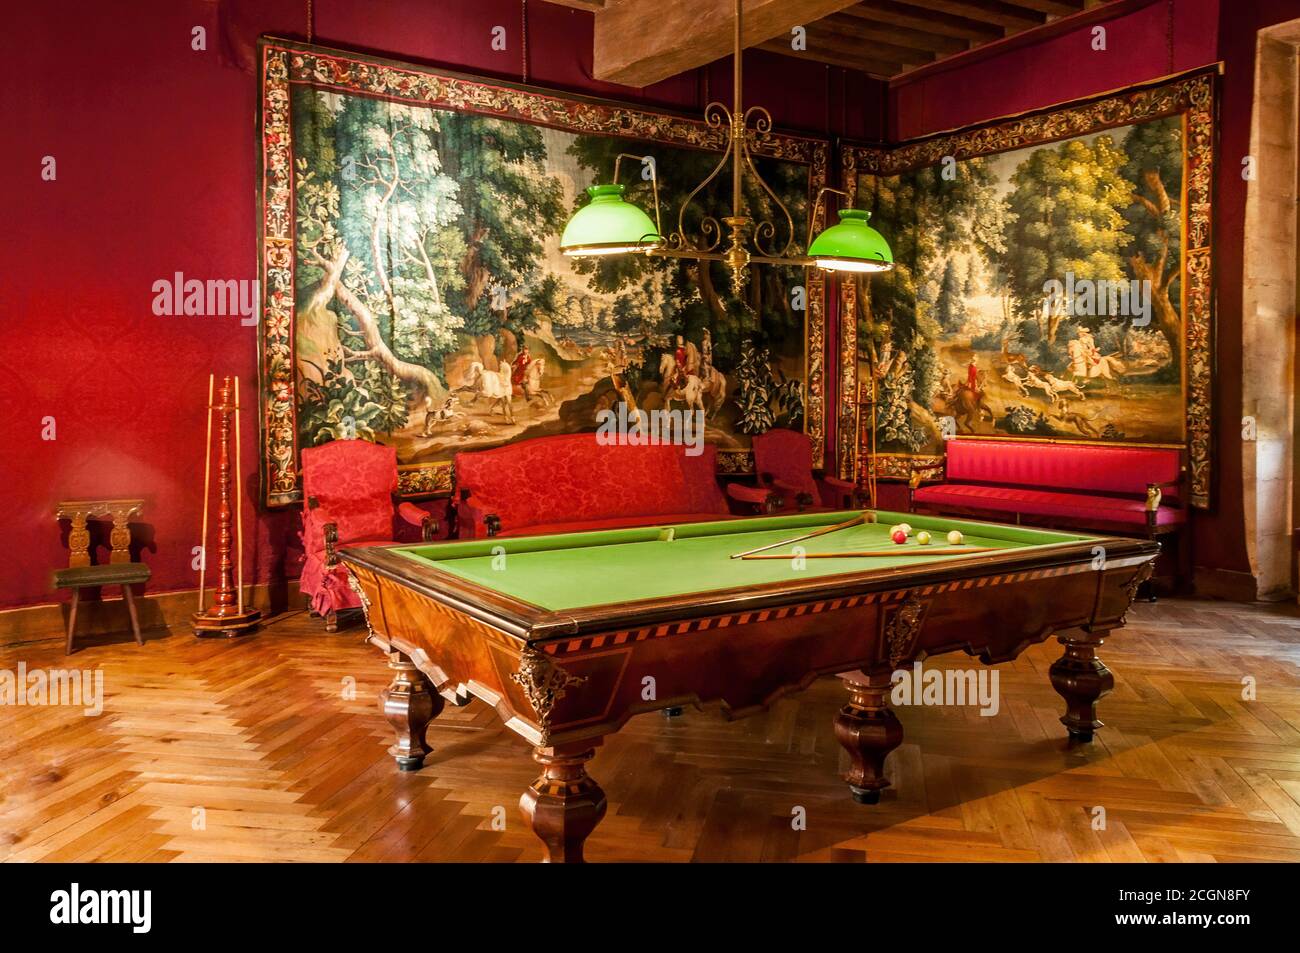 Azay-le-Rideau, France - October 30, 2013: The billiard room hung with Beauvais tapestries, woven in the 18th century, depicting hunting scenes. Azay Stock Photo